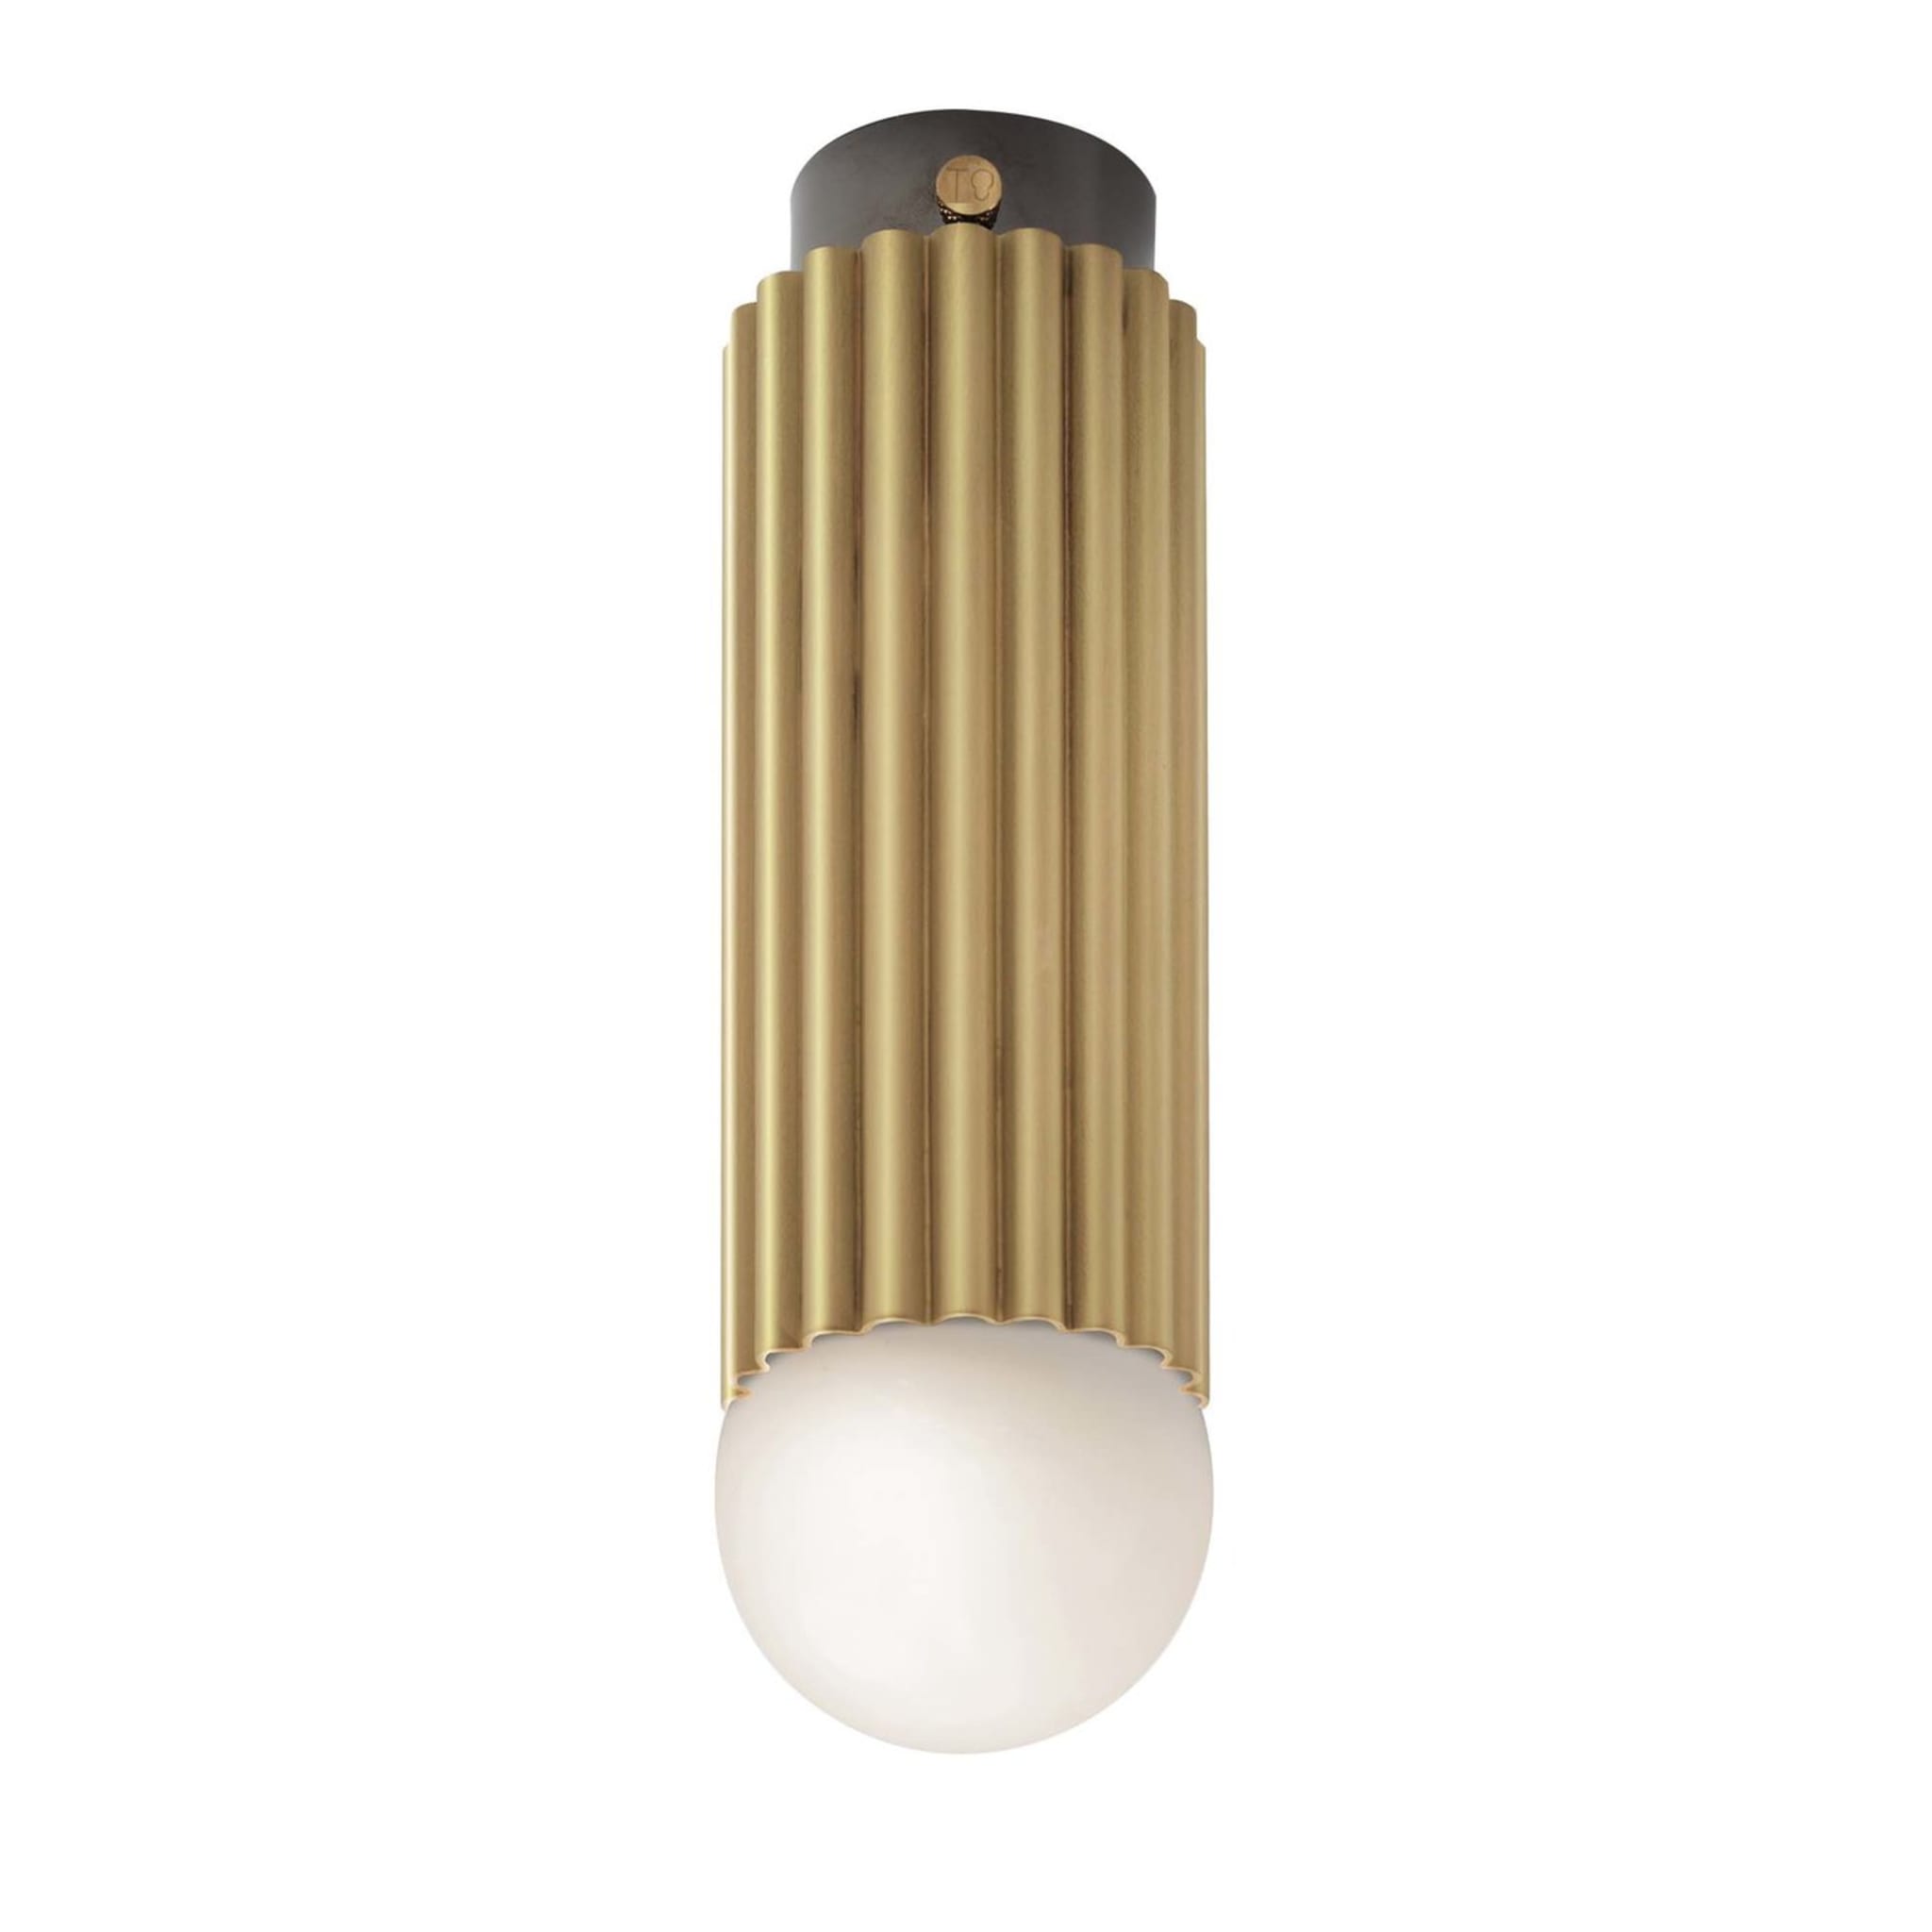 Lustrin Ceiling Lamp by Isacco Brioschi - Main view